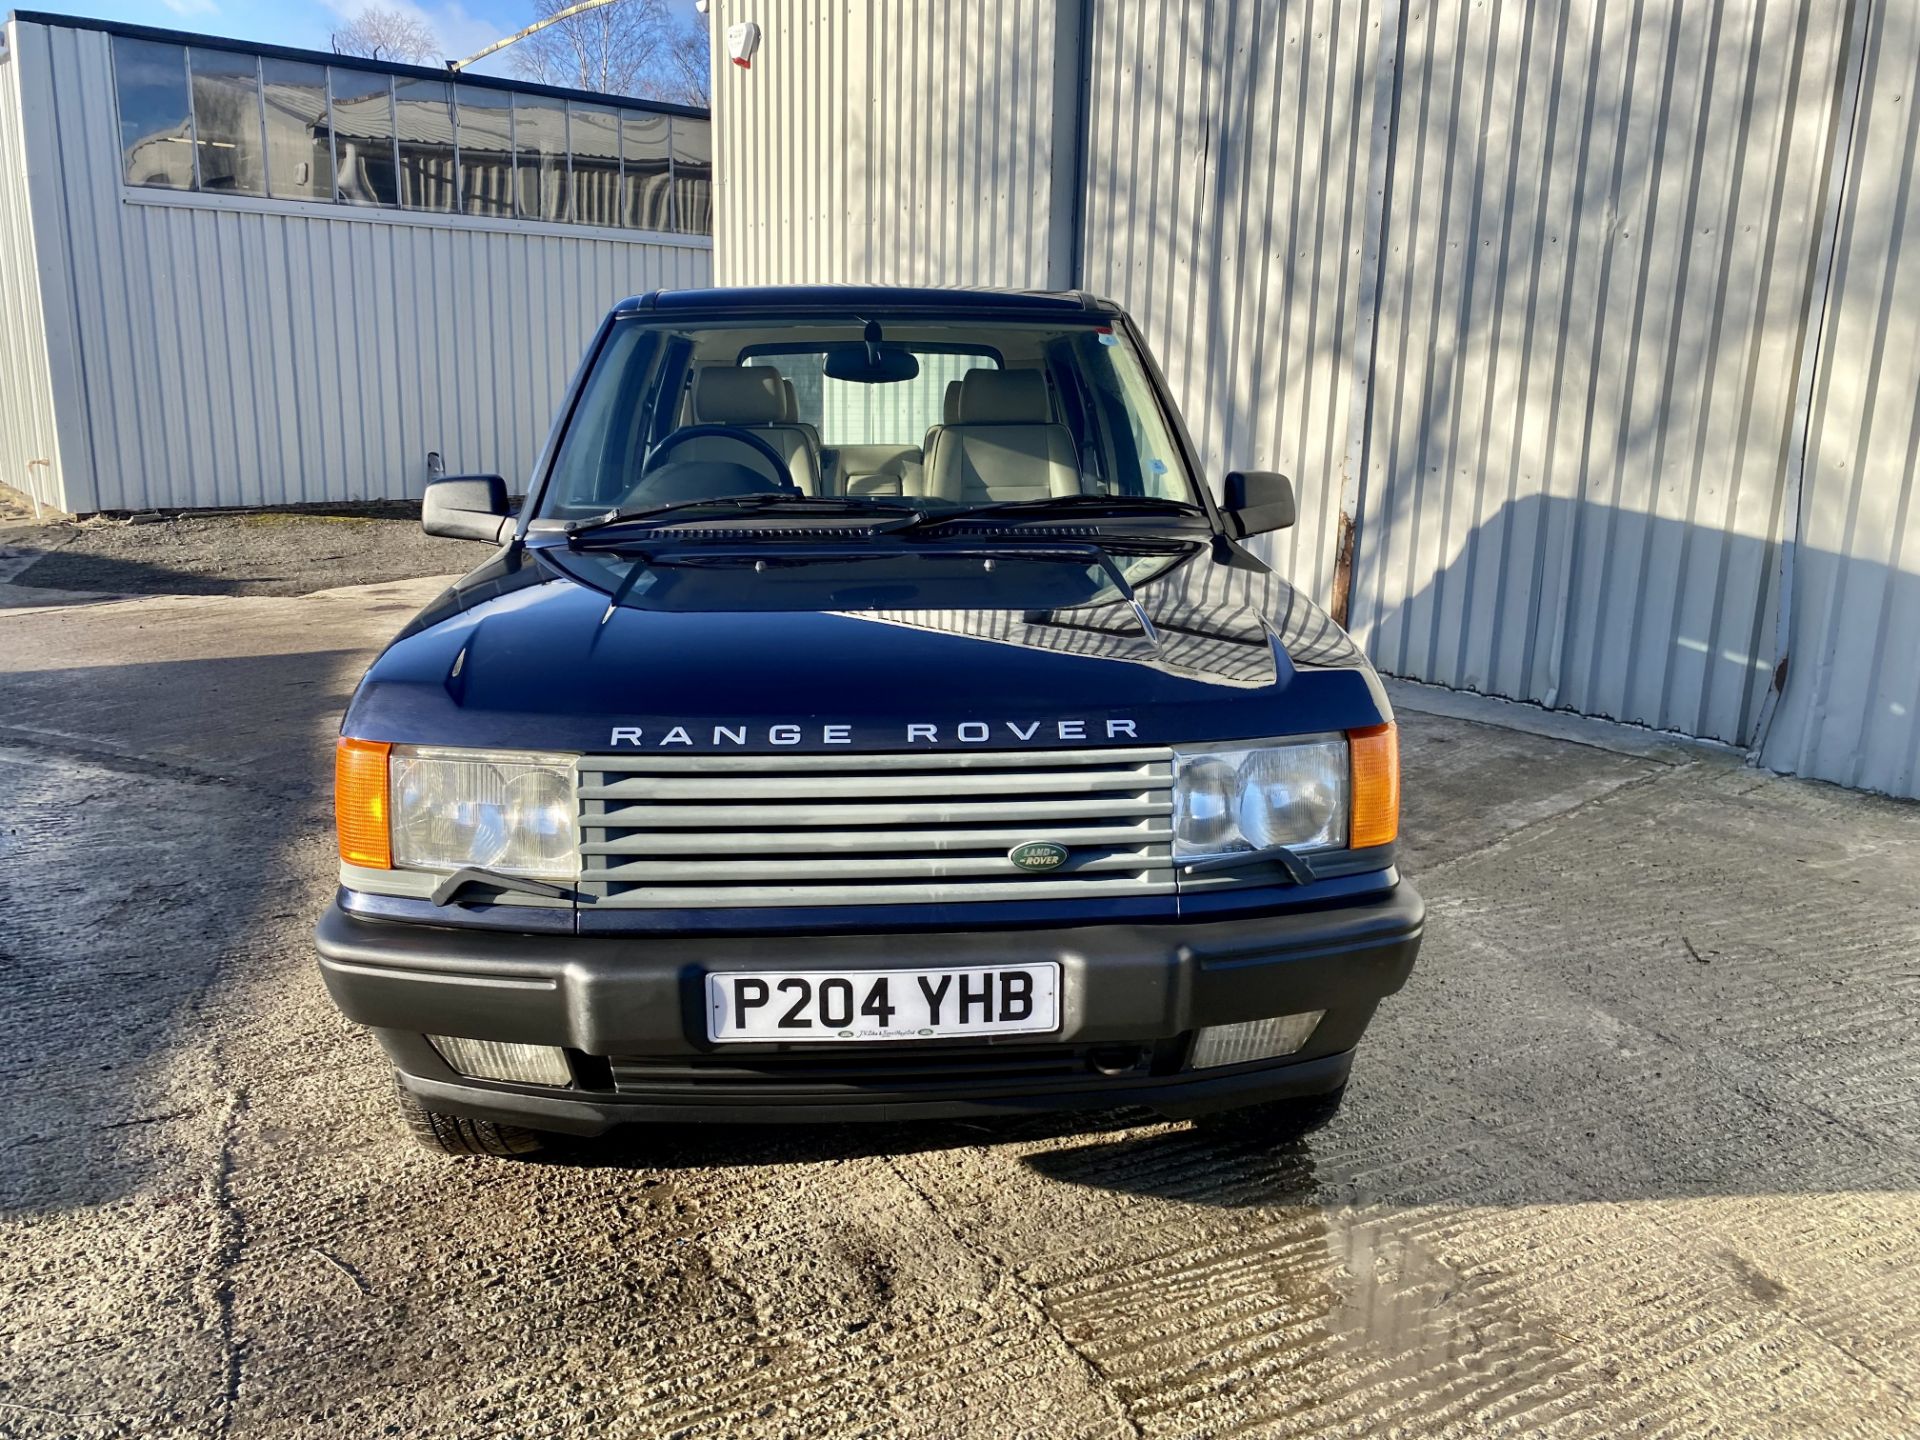 Land Rover Range Rover 4.6 - Image 12 of 40